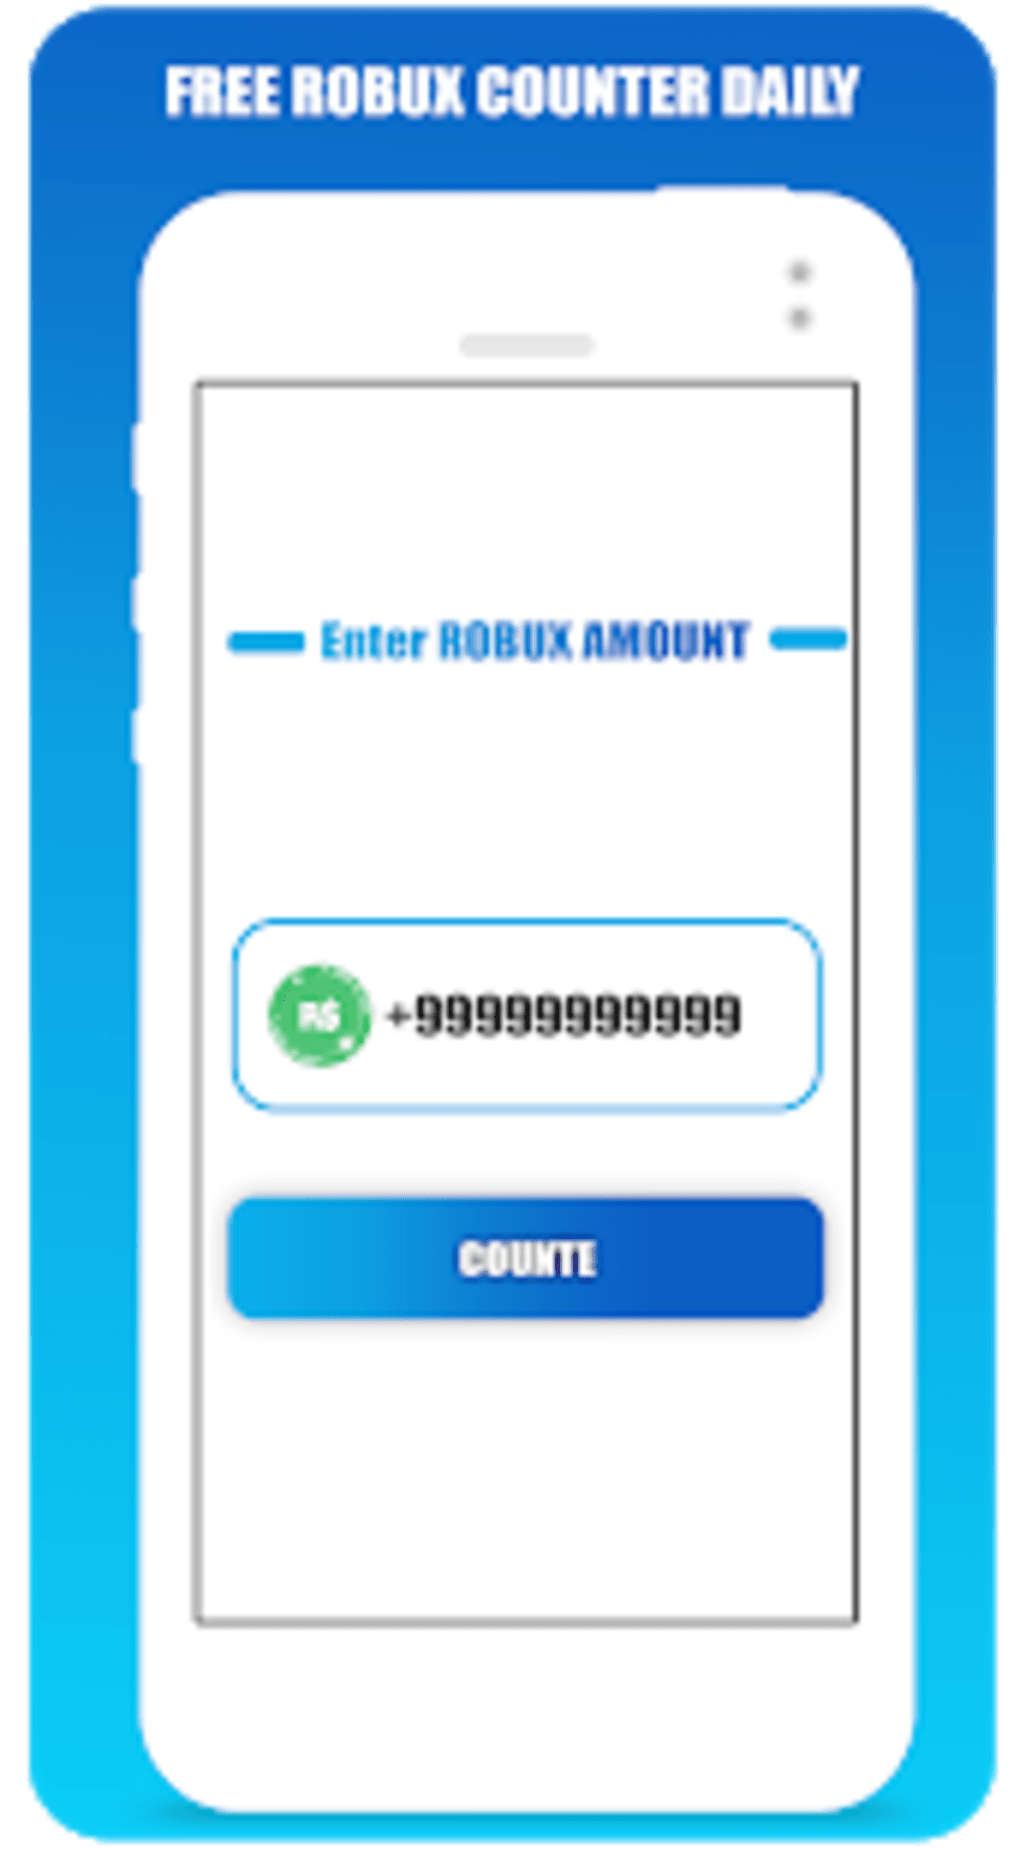 Free Robux Counter For Roblox Apk For Android Download - get roblox robux and limiteds free doublelimiteds method